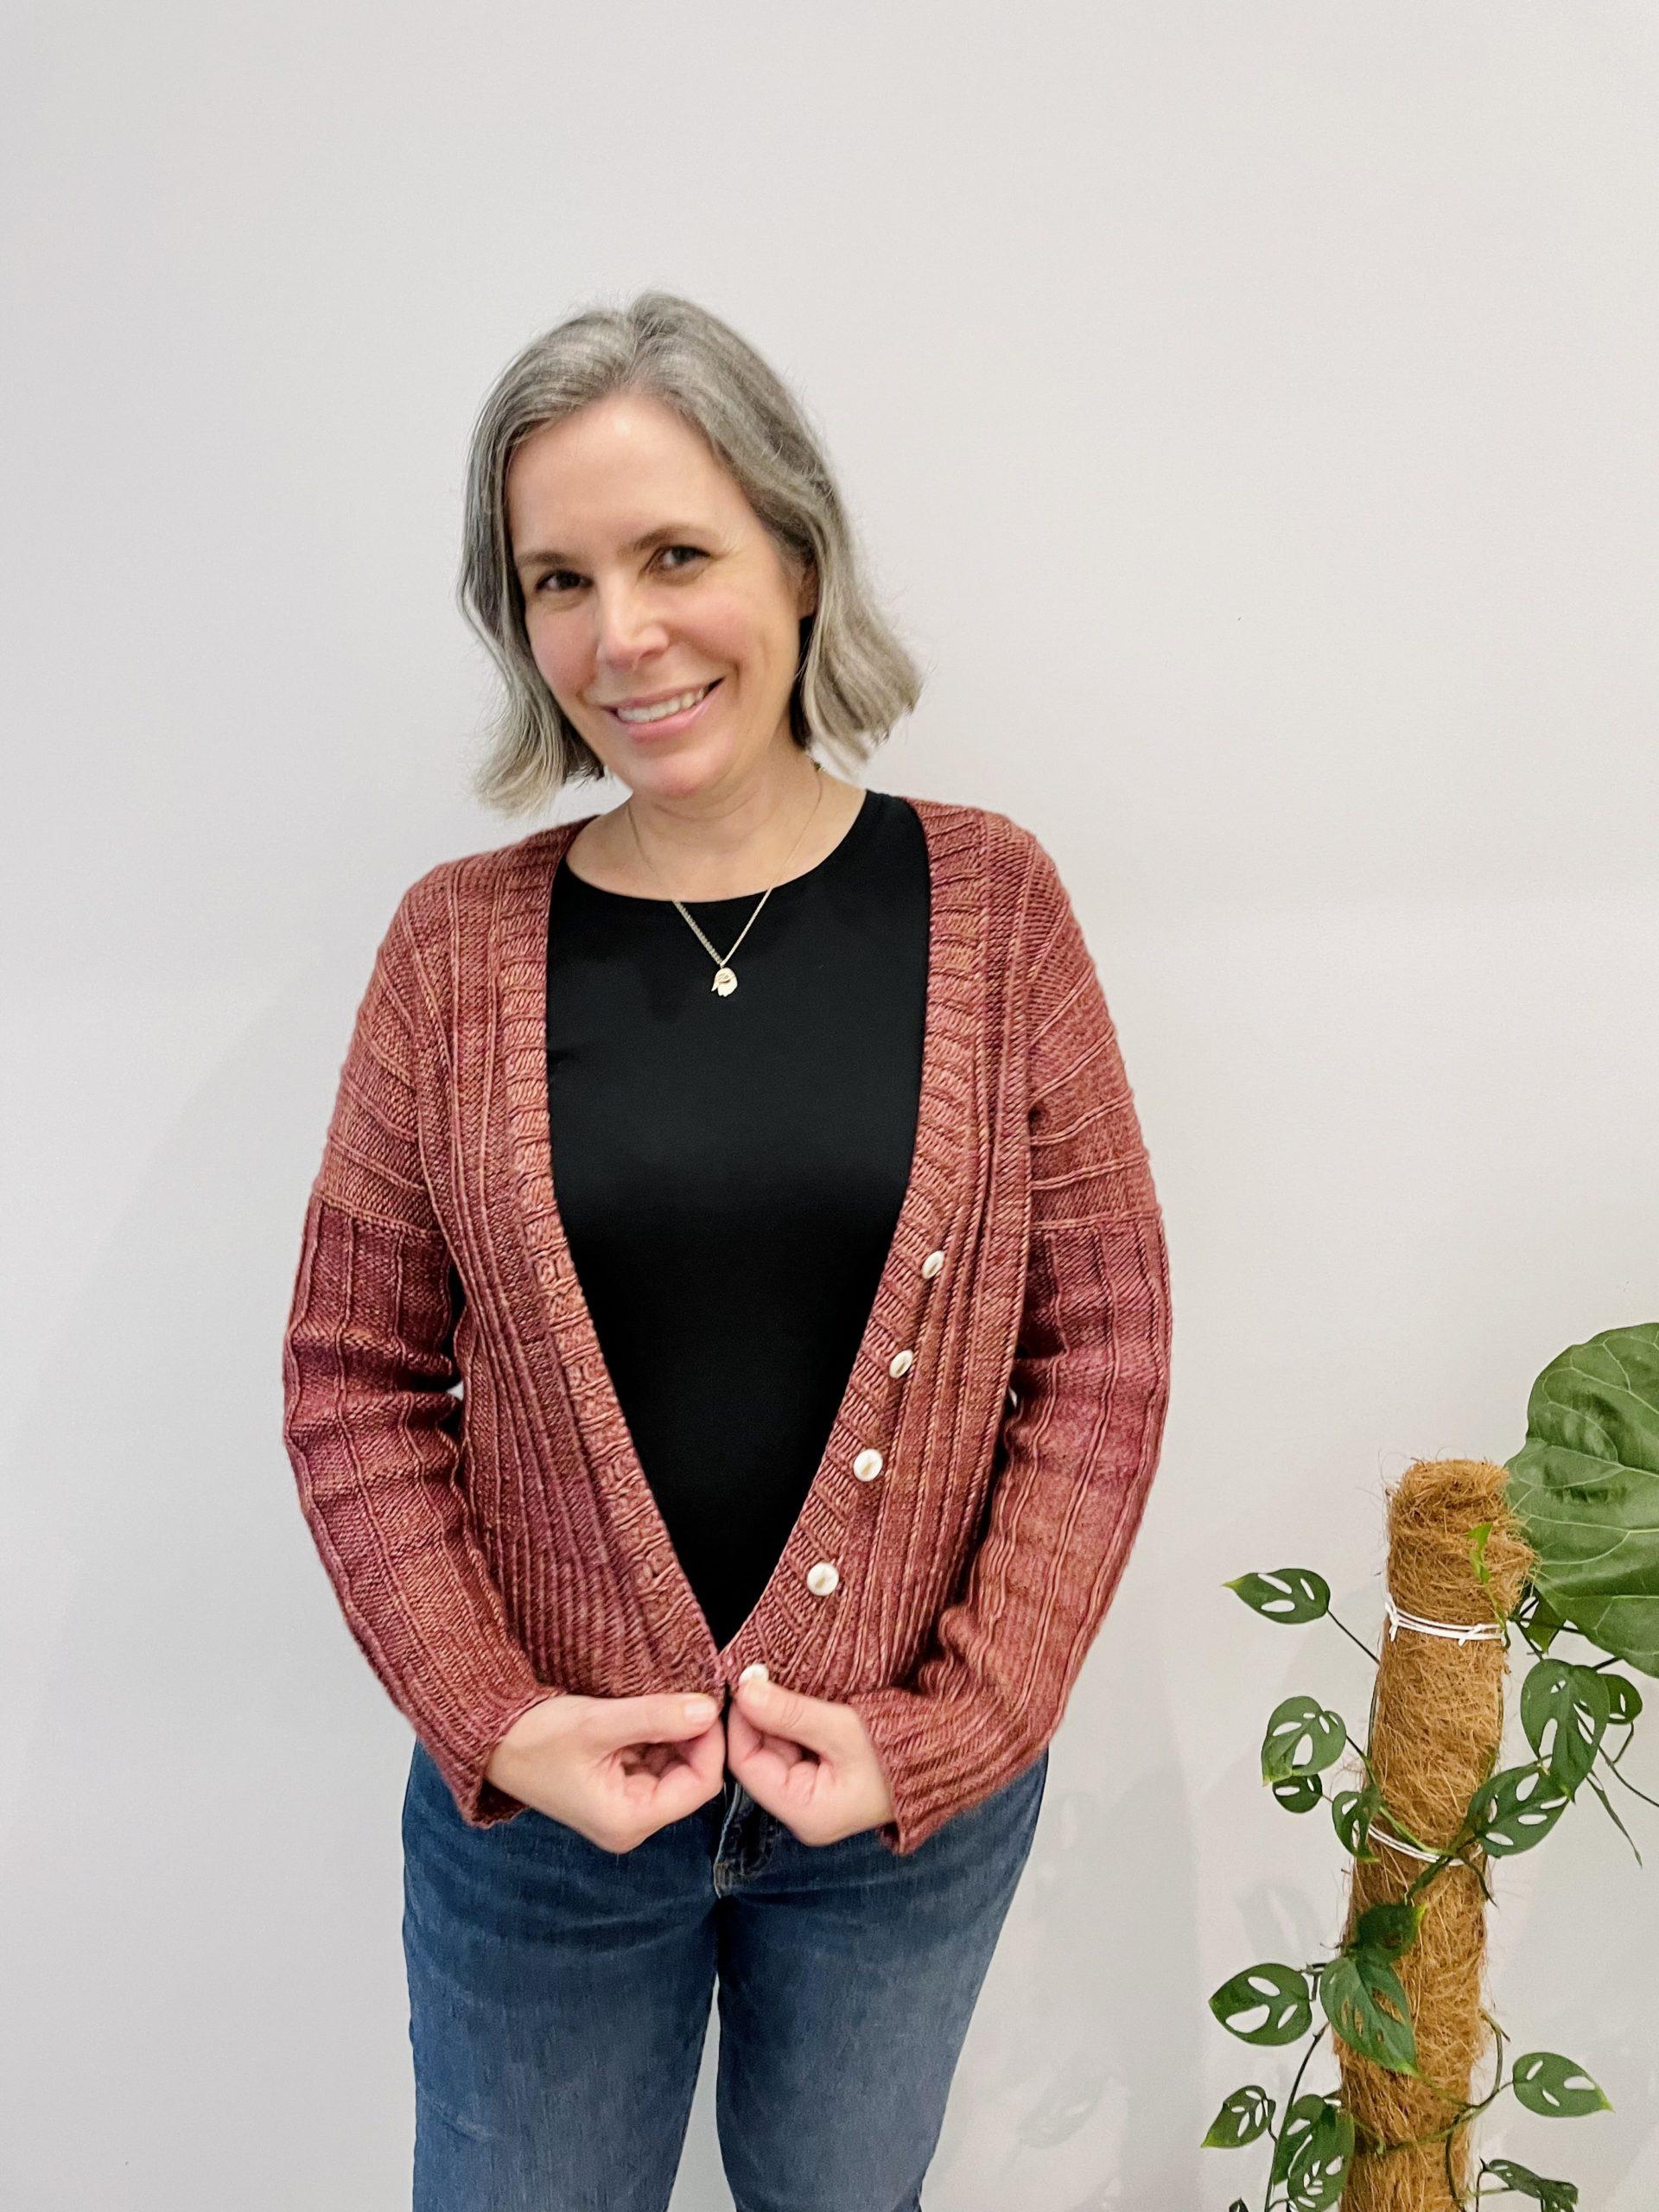 Helen Stewart, Curious Handmade, wearing a handknitted cardigan in a rose gold peach, design by Renee Callahan. There is a green climbing plant to Helen's right, and a white background